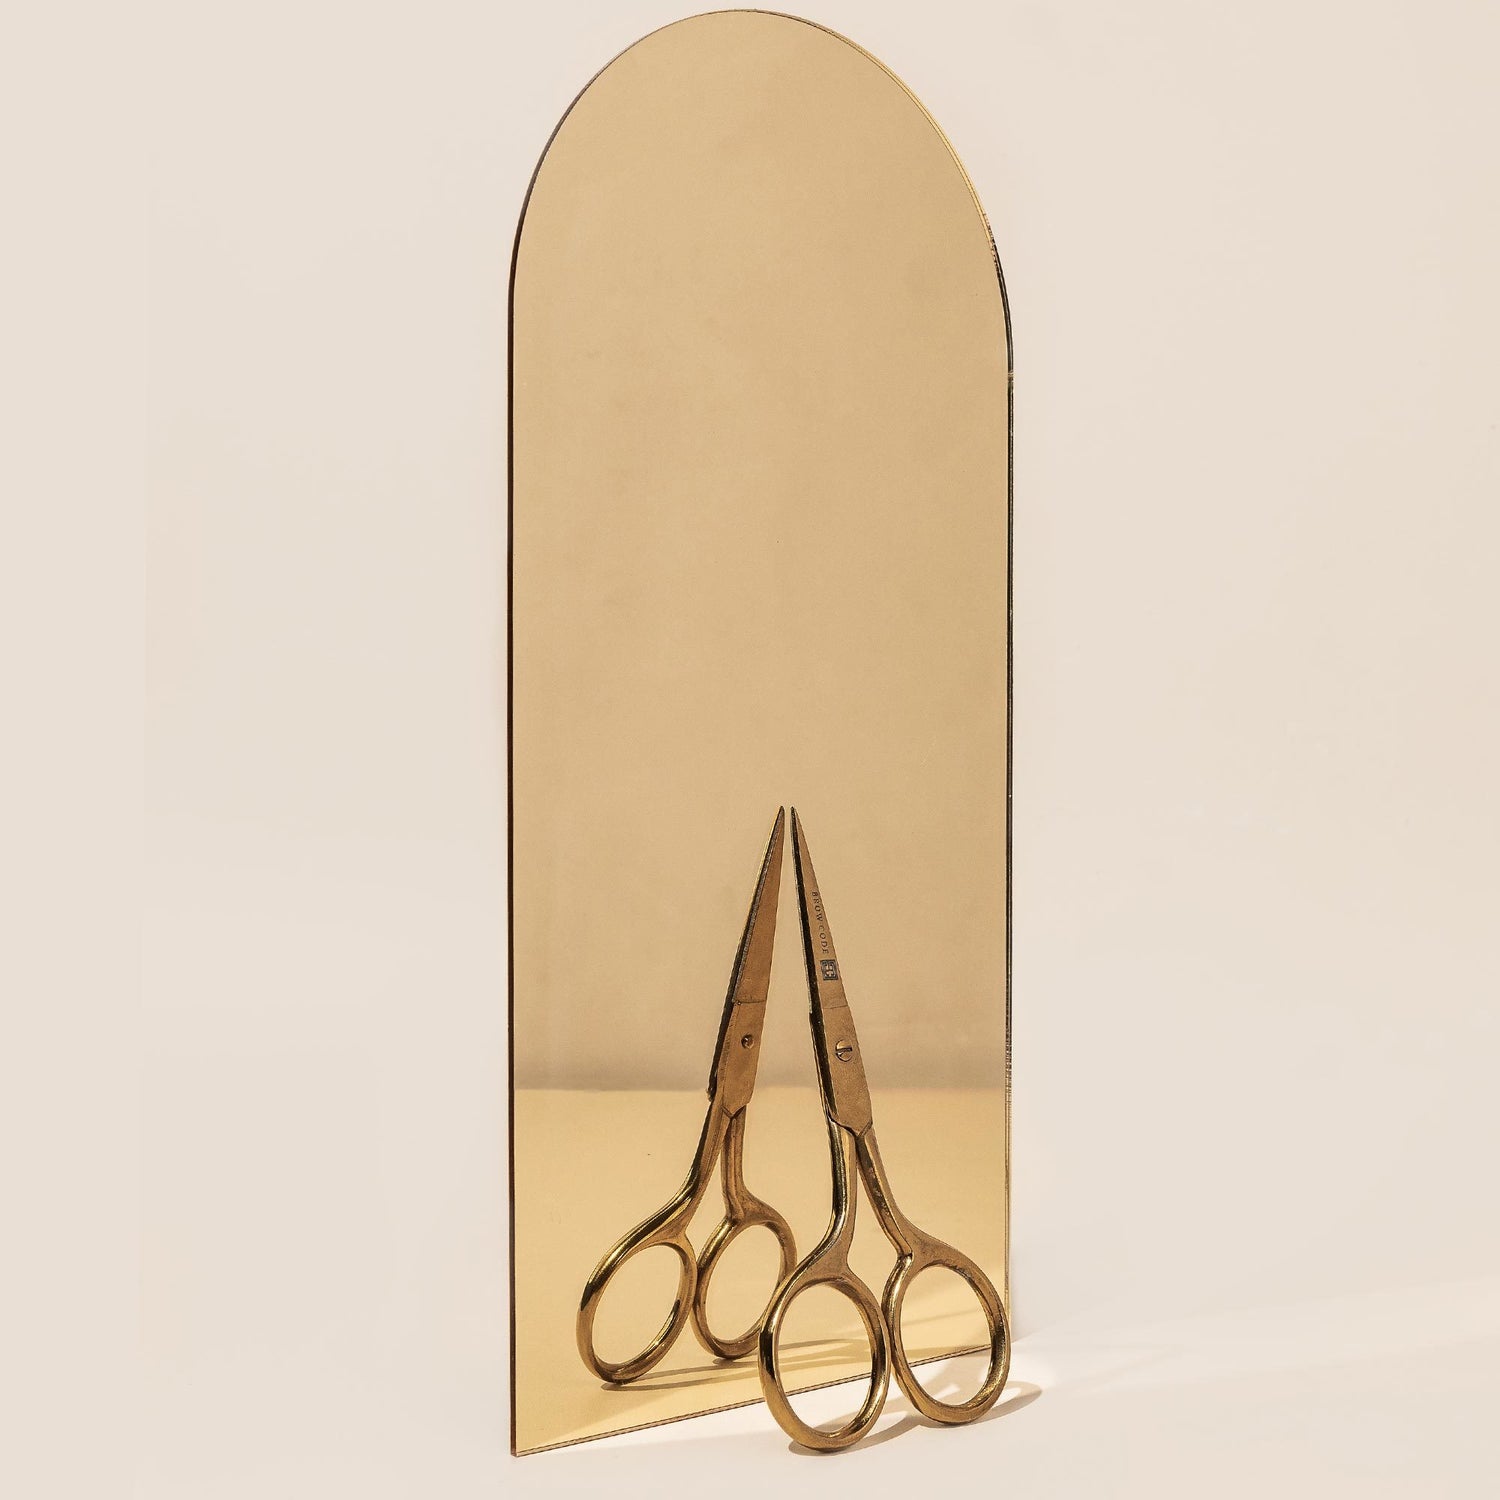 Stylised photo of the trimming scissors against a mirror